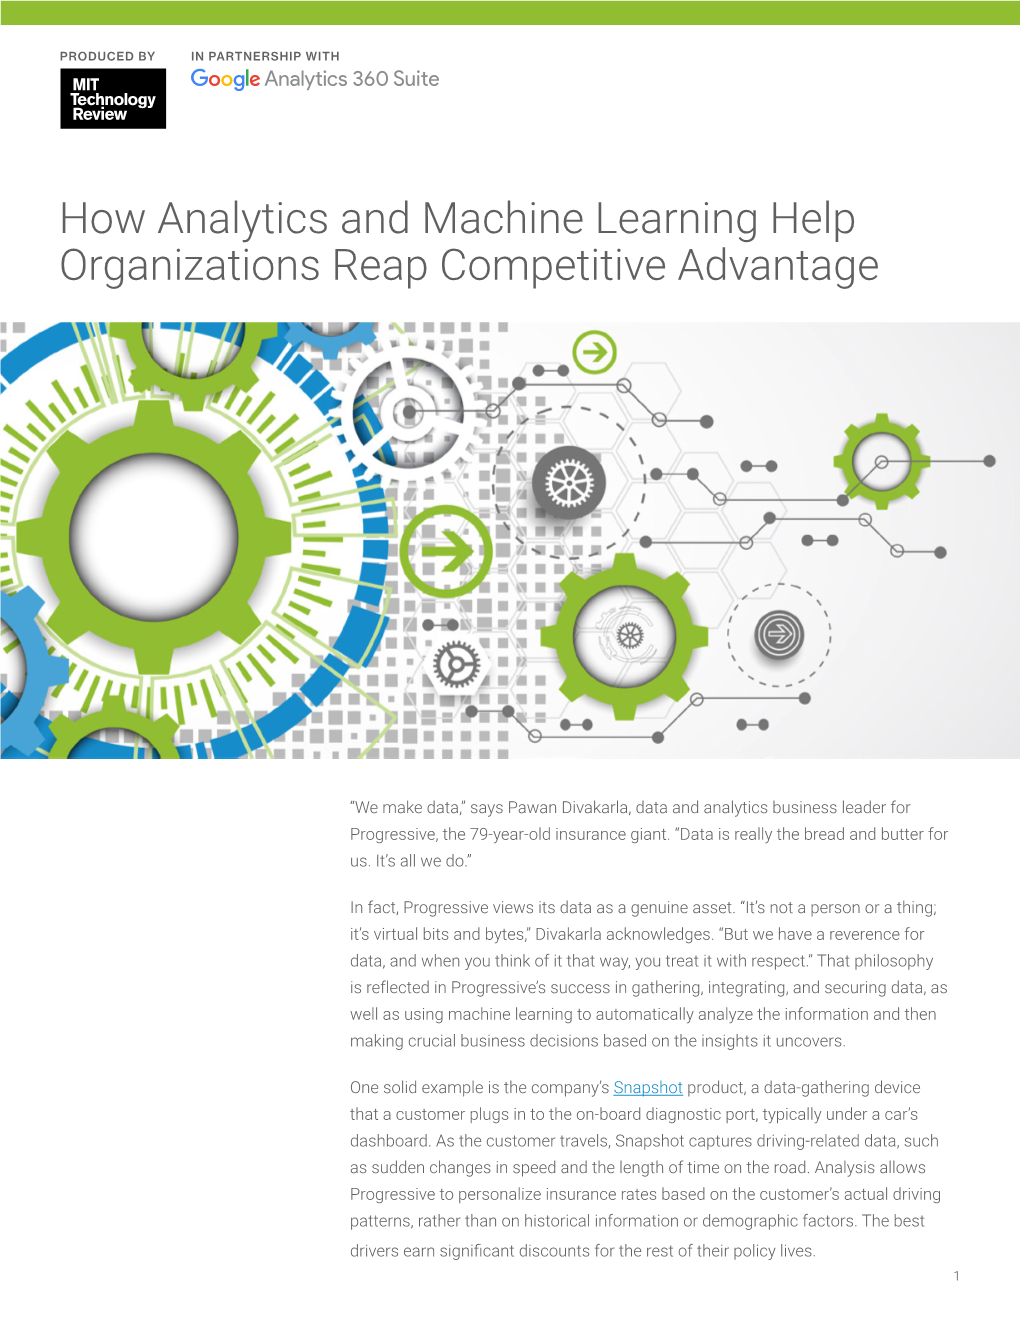 How Analytics and Machine Learning Help Organizations Reap Competitive Advantage